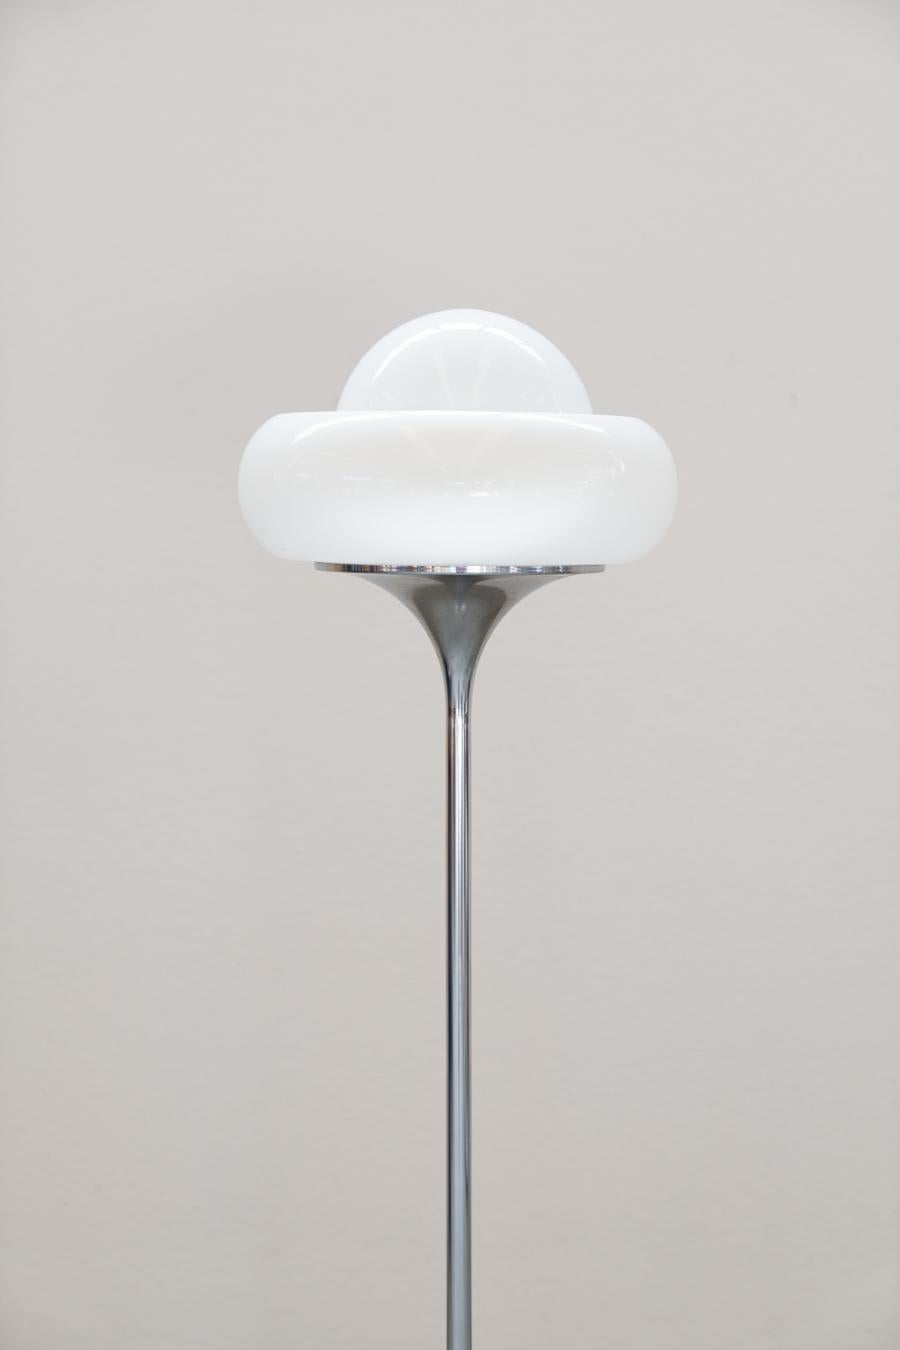 Floor Lamp by Harvey Guzzini, 1960s
Iconic rare-form Italian floor lamp designed by Harvey Guzzini for Guzzini in the 1960s. Round chromed metal base with cast iron counterweight inside. Long chrome rod. Chrome-plated round conical lamp holder,